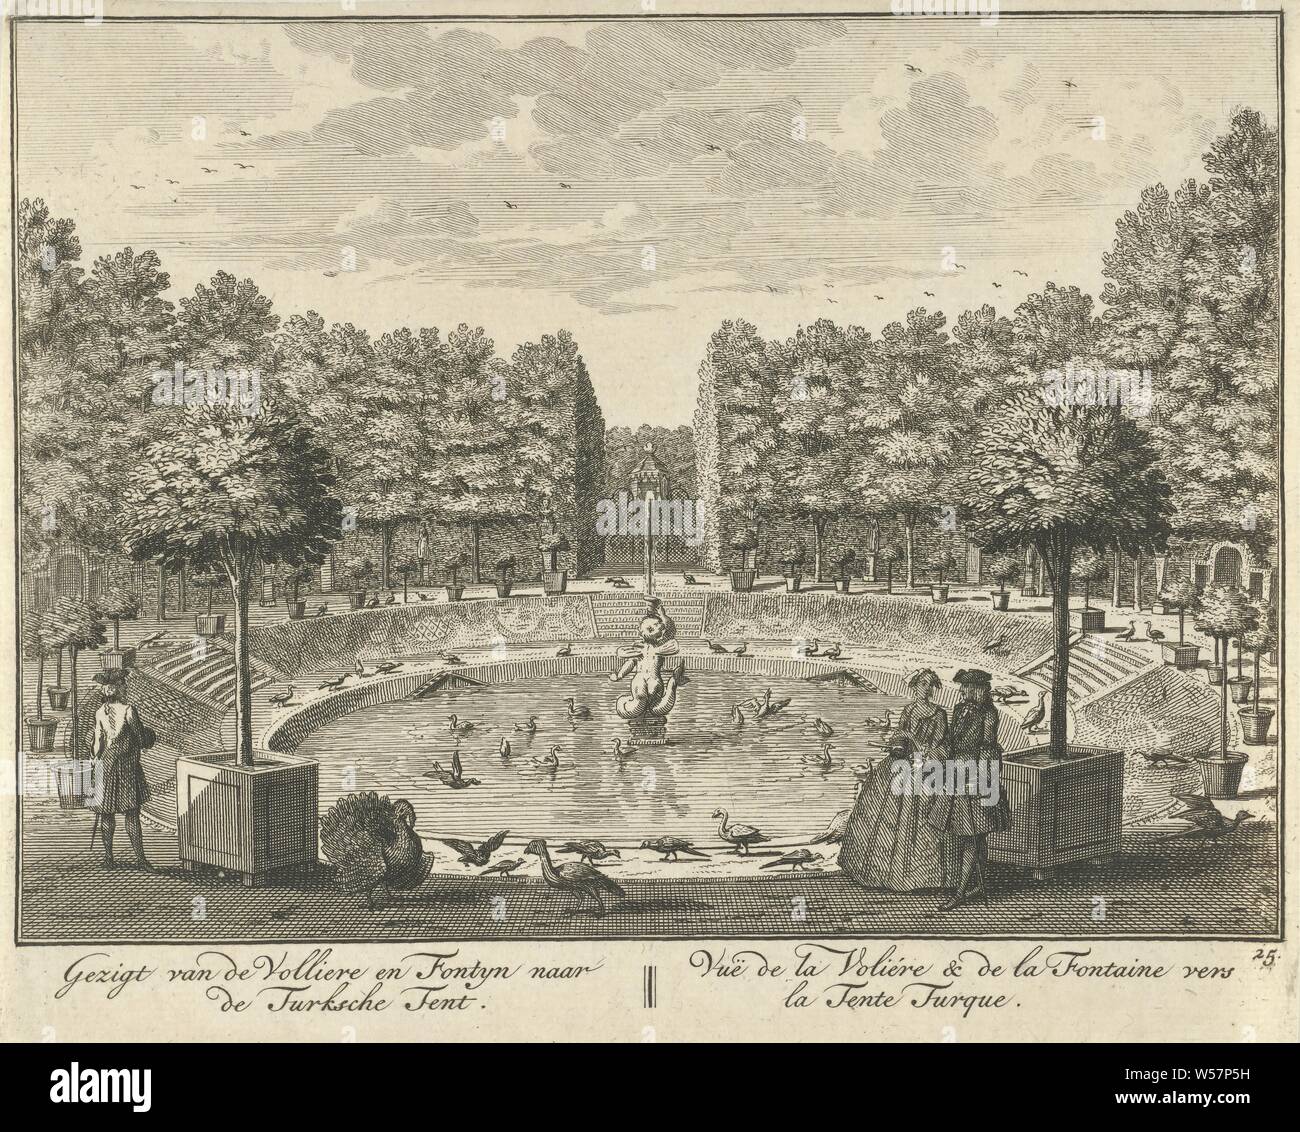 View of the large fountain and the Turkish Tent in the garden of Huis ter Meer in Maarssen Gezigt from the Volliere and Fontyn to the Turkish Tent / Vue de la Volière & de la Fontaine vers la Tente Turque (title on object) The Oud Adelyk huys and Ridderhofstad Ter Meer (series title), View of the large fountain and the Turkish Tent in the French garden of Huis ter Meer. Various birds walk around the fountain. In the foreground are some figures on the edge of the basin. The print is part of a series with 26 faces on Huis ter Meer and the accompanying estate in Maarssen, country house, French Stock Photo